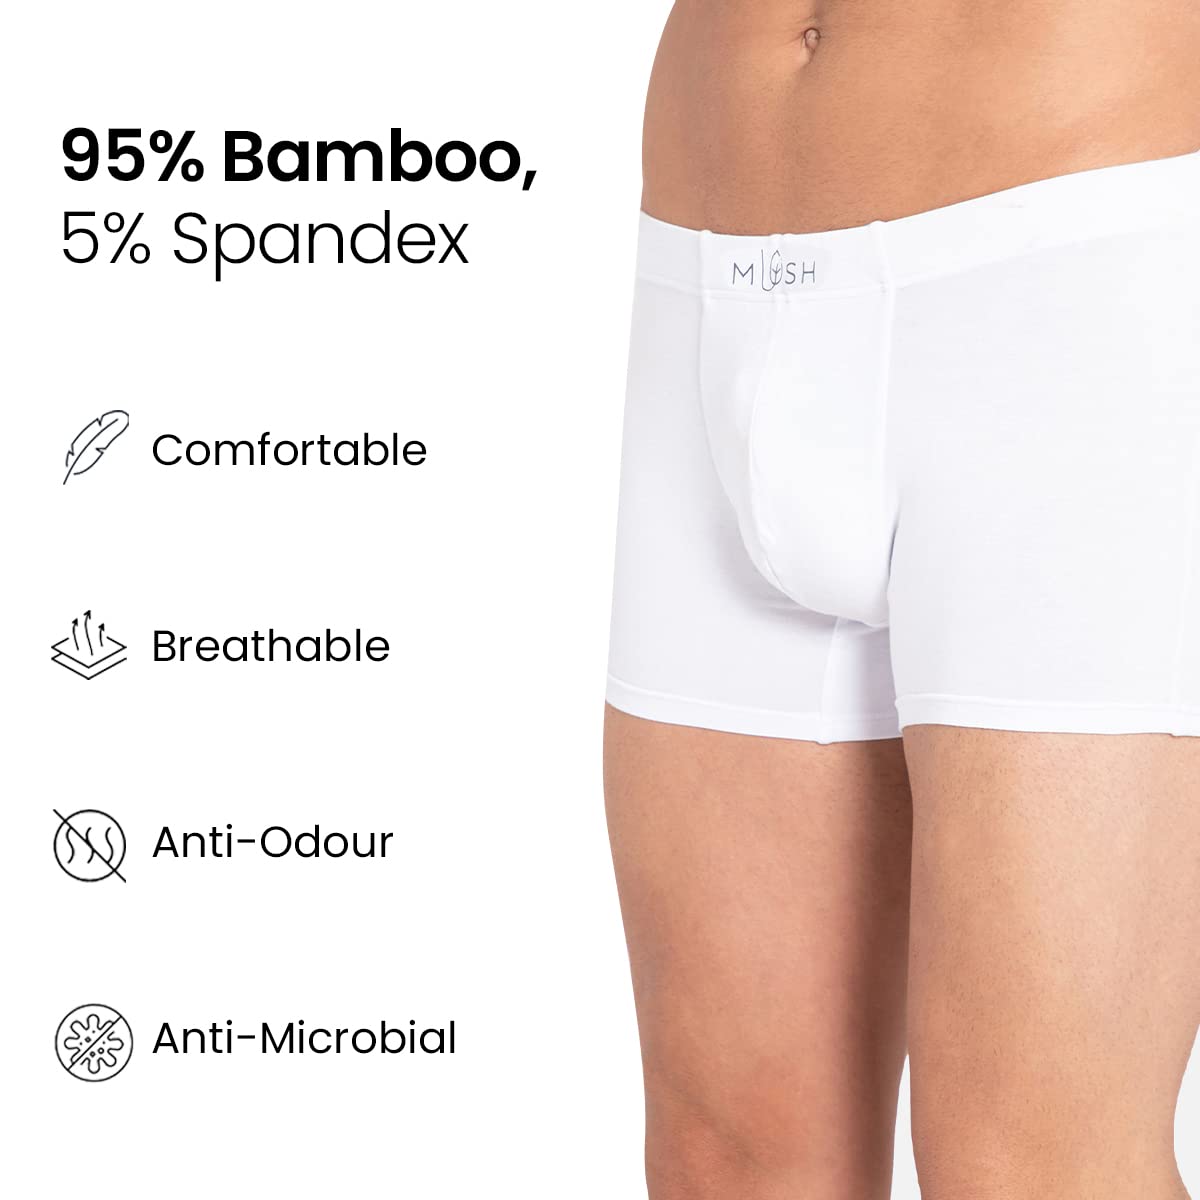 Mush Ultra Soft, Breathable, Feather Light Men's Bamboo Trunk || Naturally Anti-Odor and Anti-Microbial Bamboo Innerwear Pack of 3 (S, Grey White and Black)